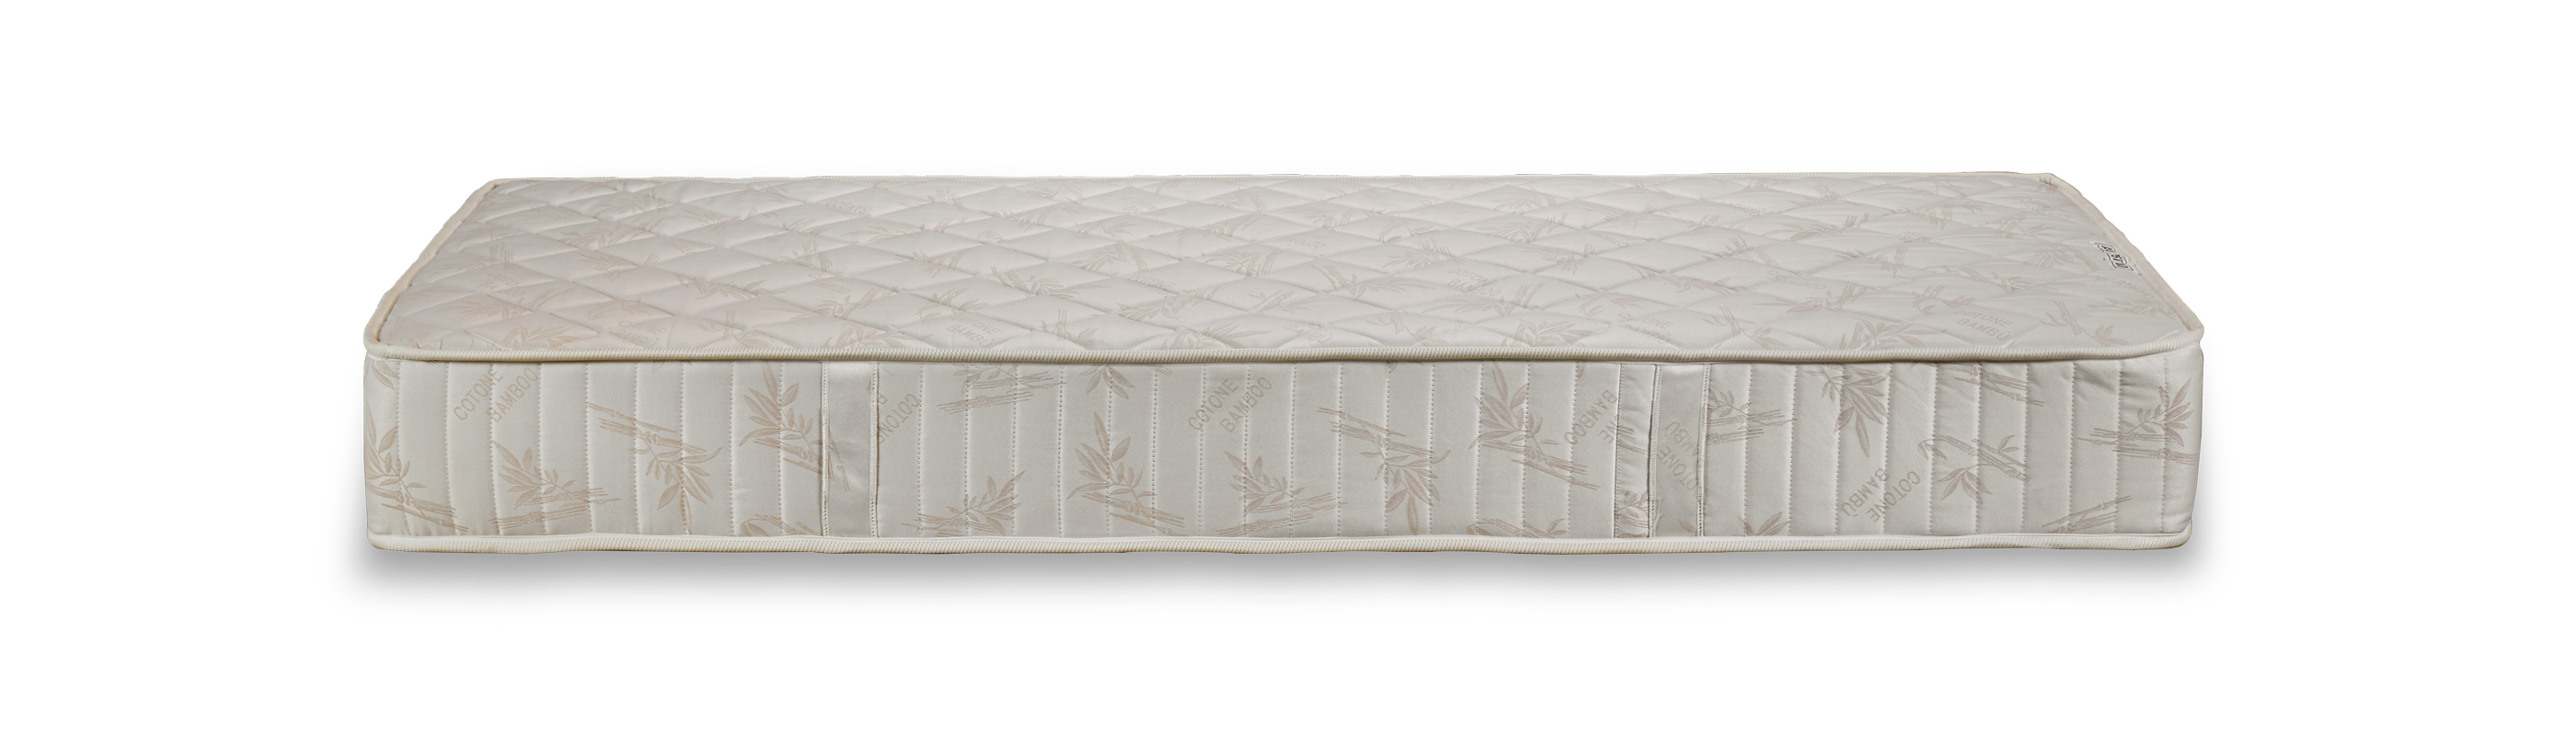 Orthopaedic anatomical quilted spring mattress | Extra Super 